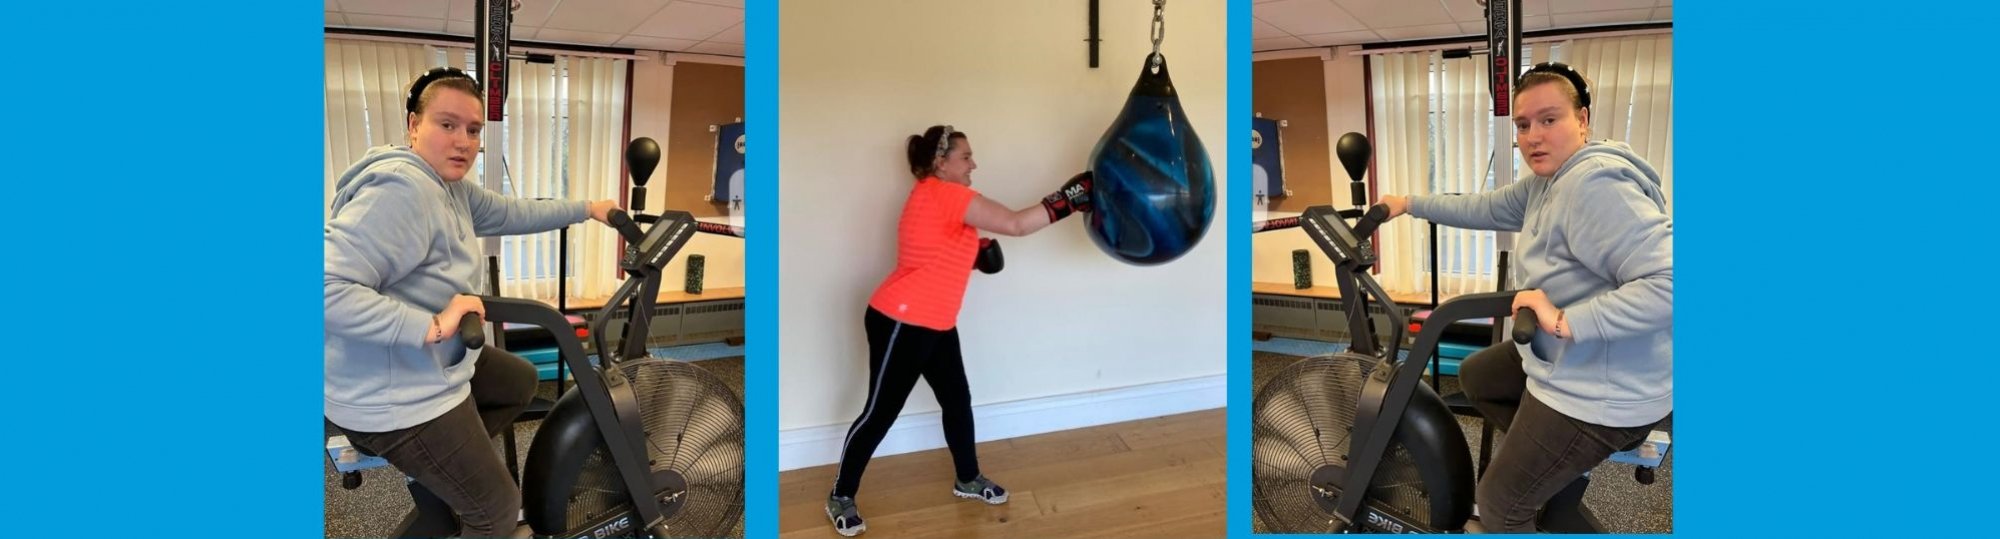 Boxing Her Way to Fitness - Sarisa